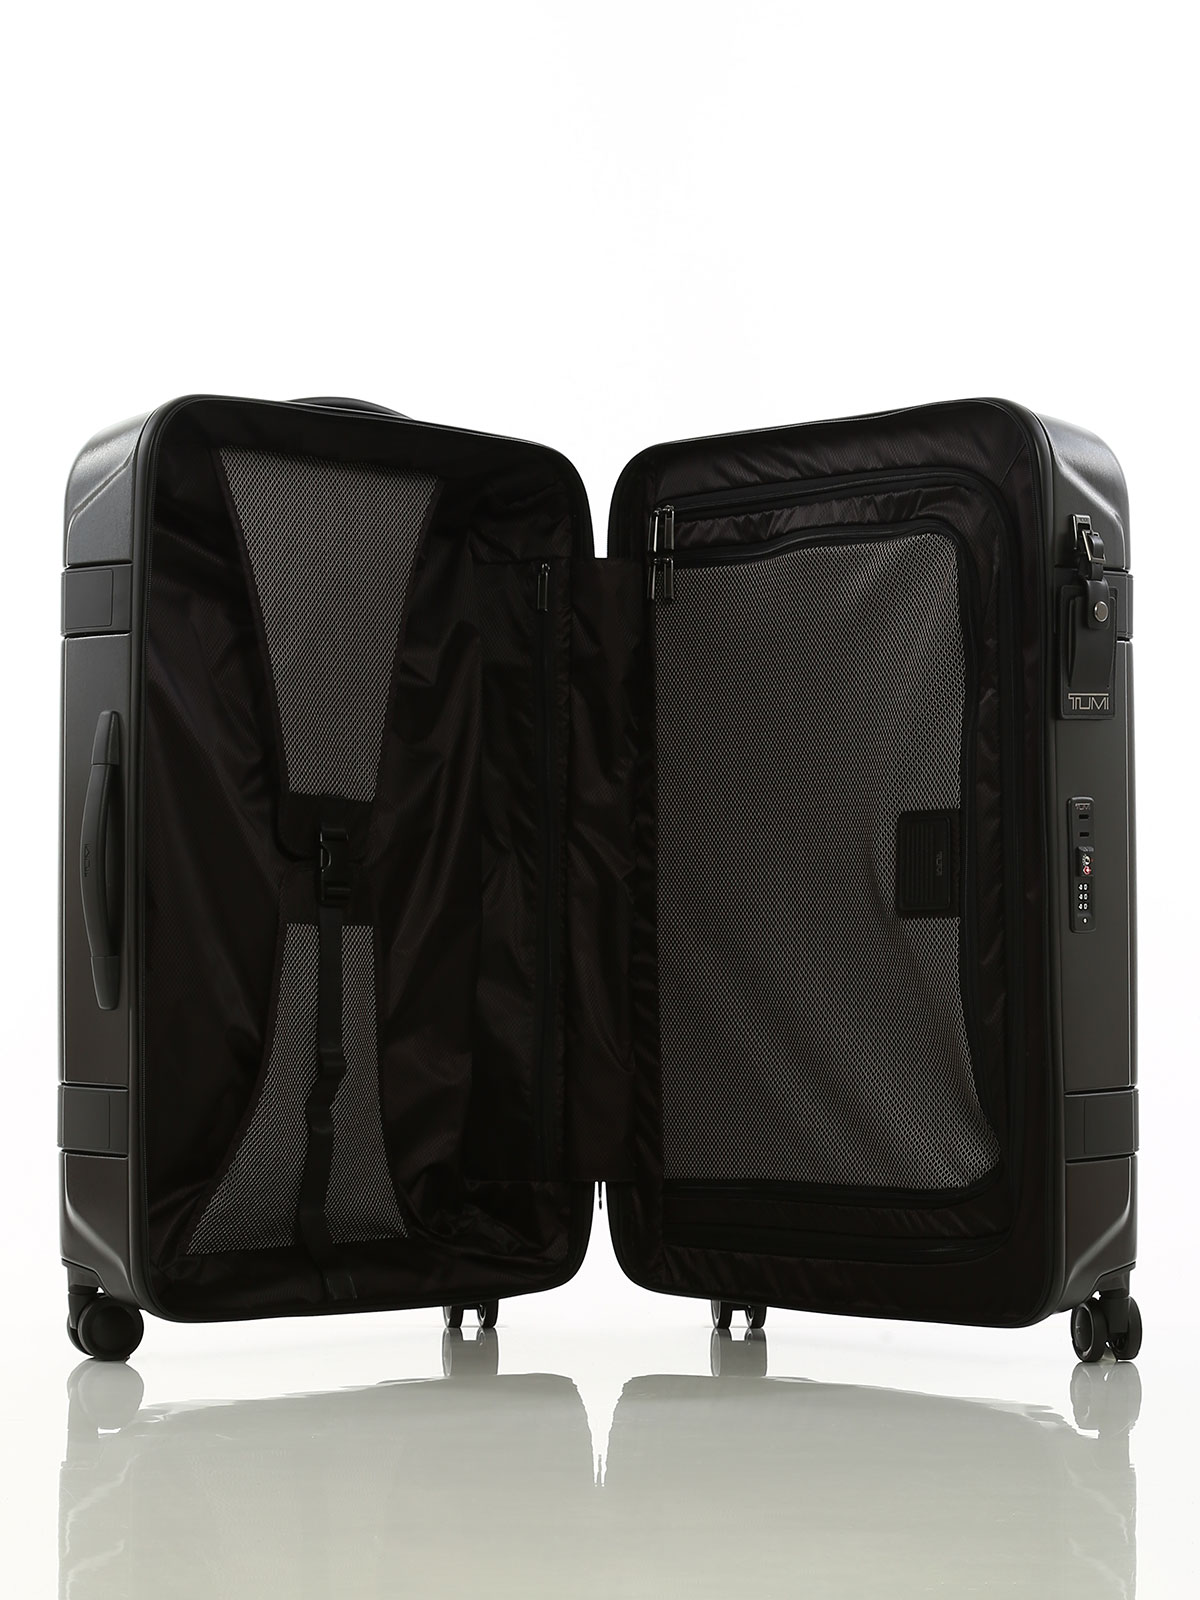 Luggage & Travel bags Tumi - TLX extended trip packing case - 0226069TT